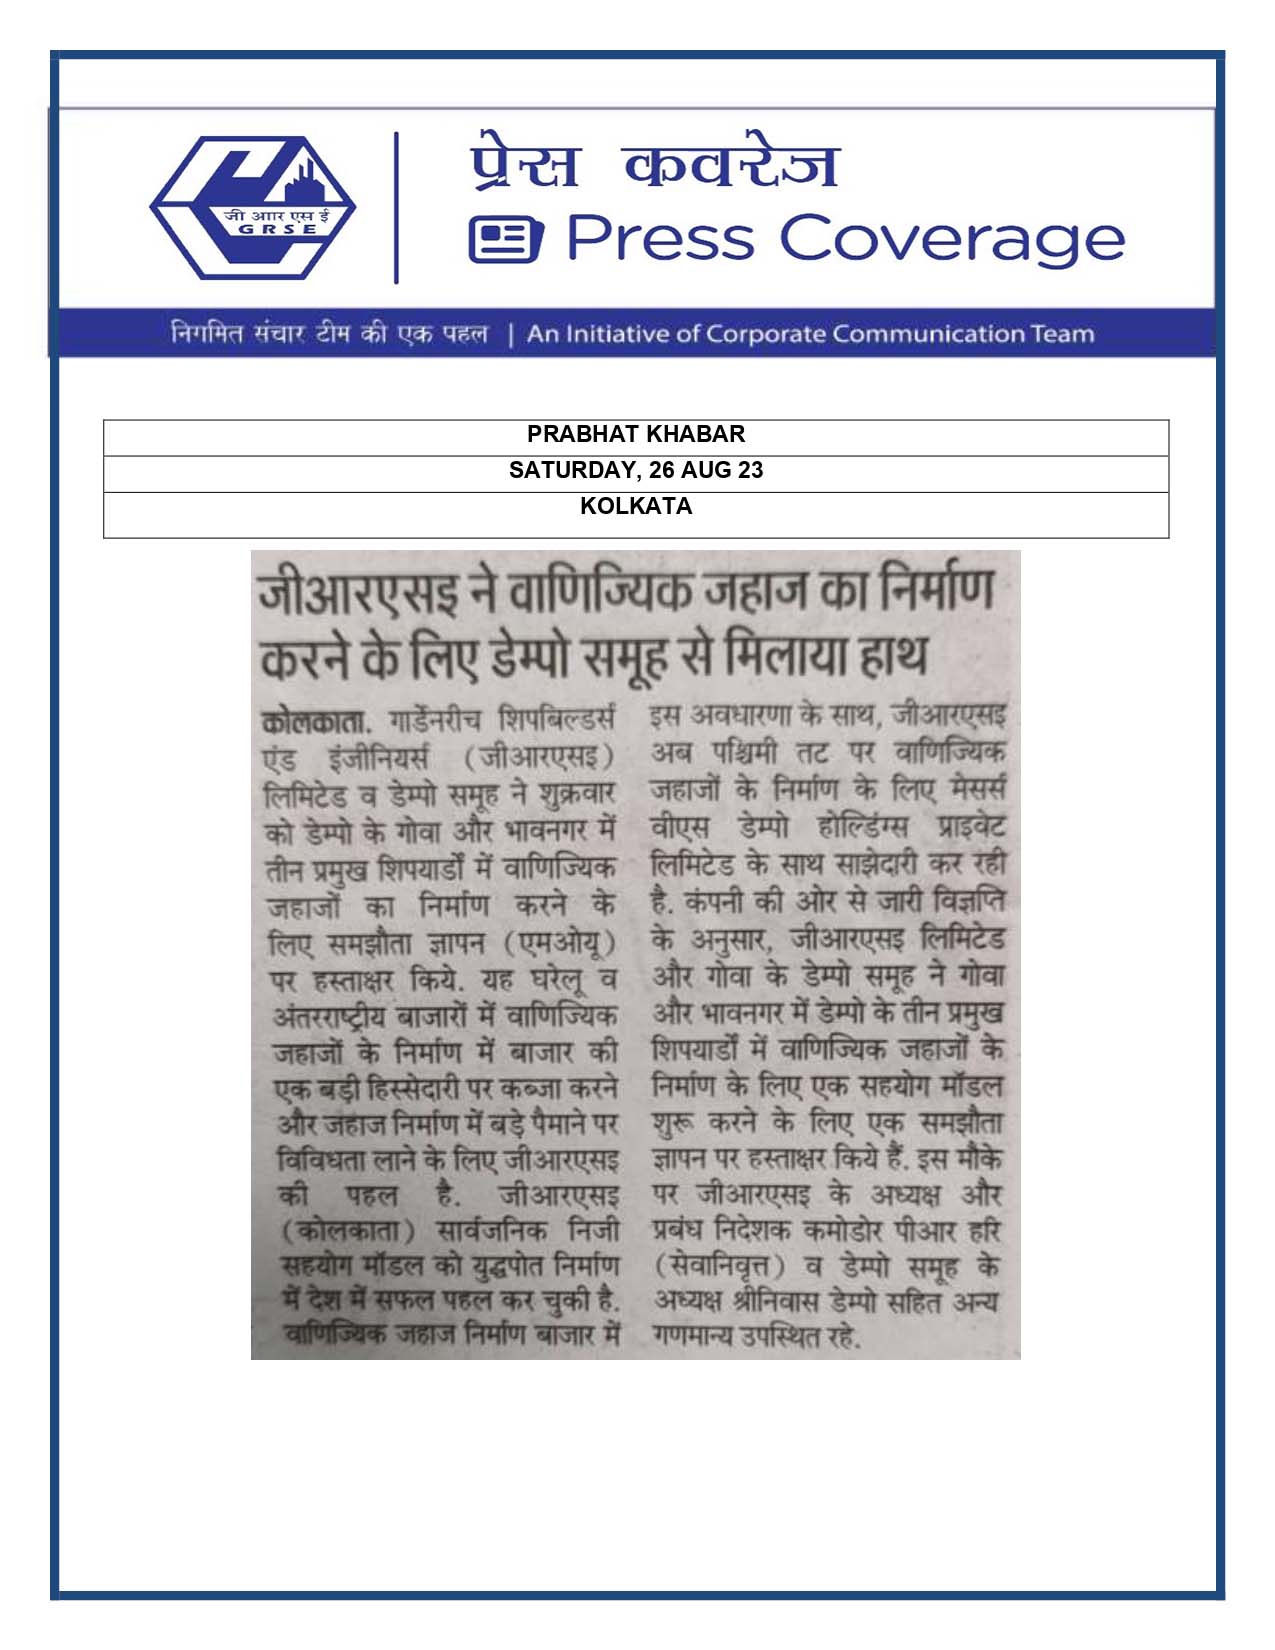 Press Coverage : Prabhat Khabar, 26 Aug 23 : GRSE to build big commercial vessels signed MoU with Dempo